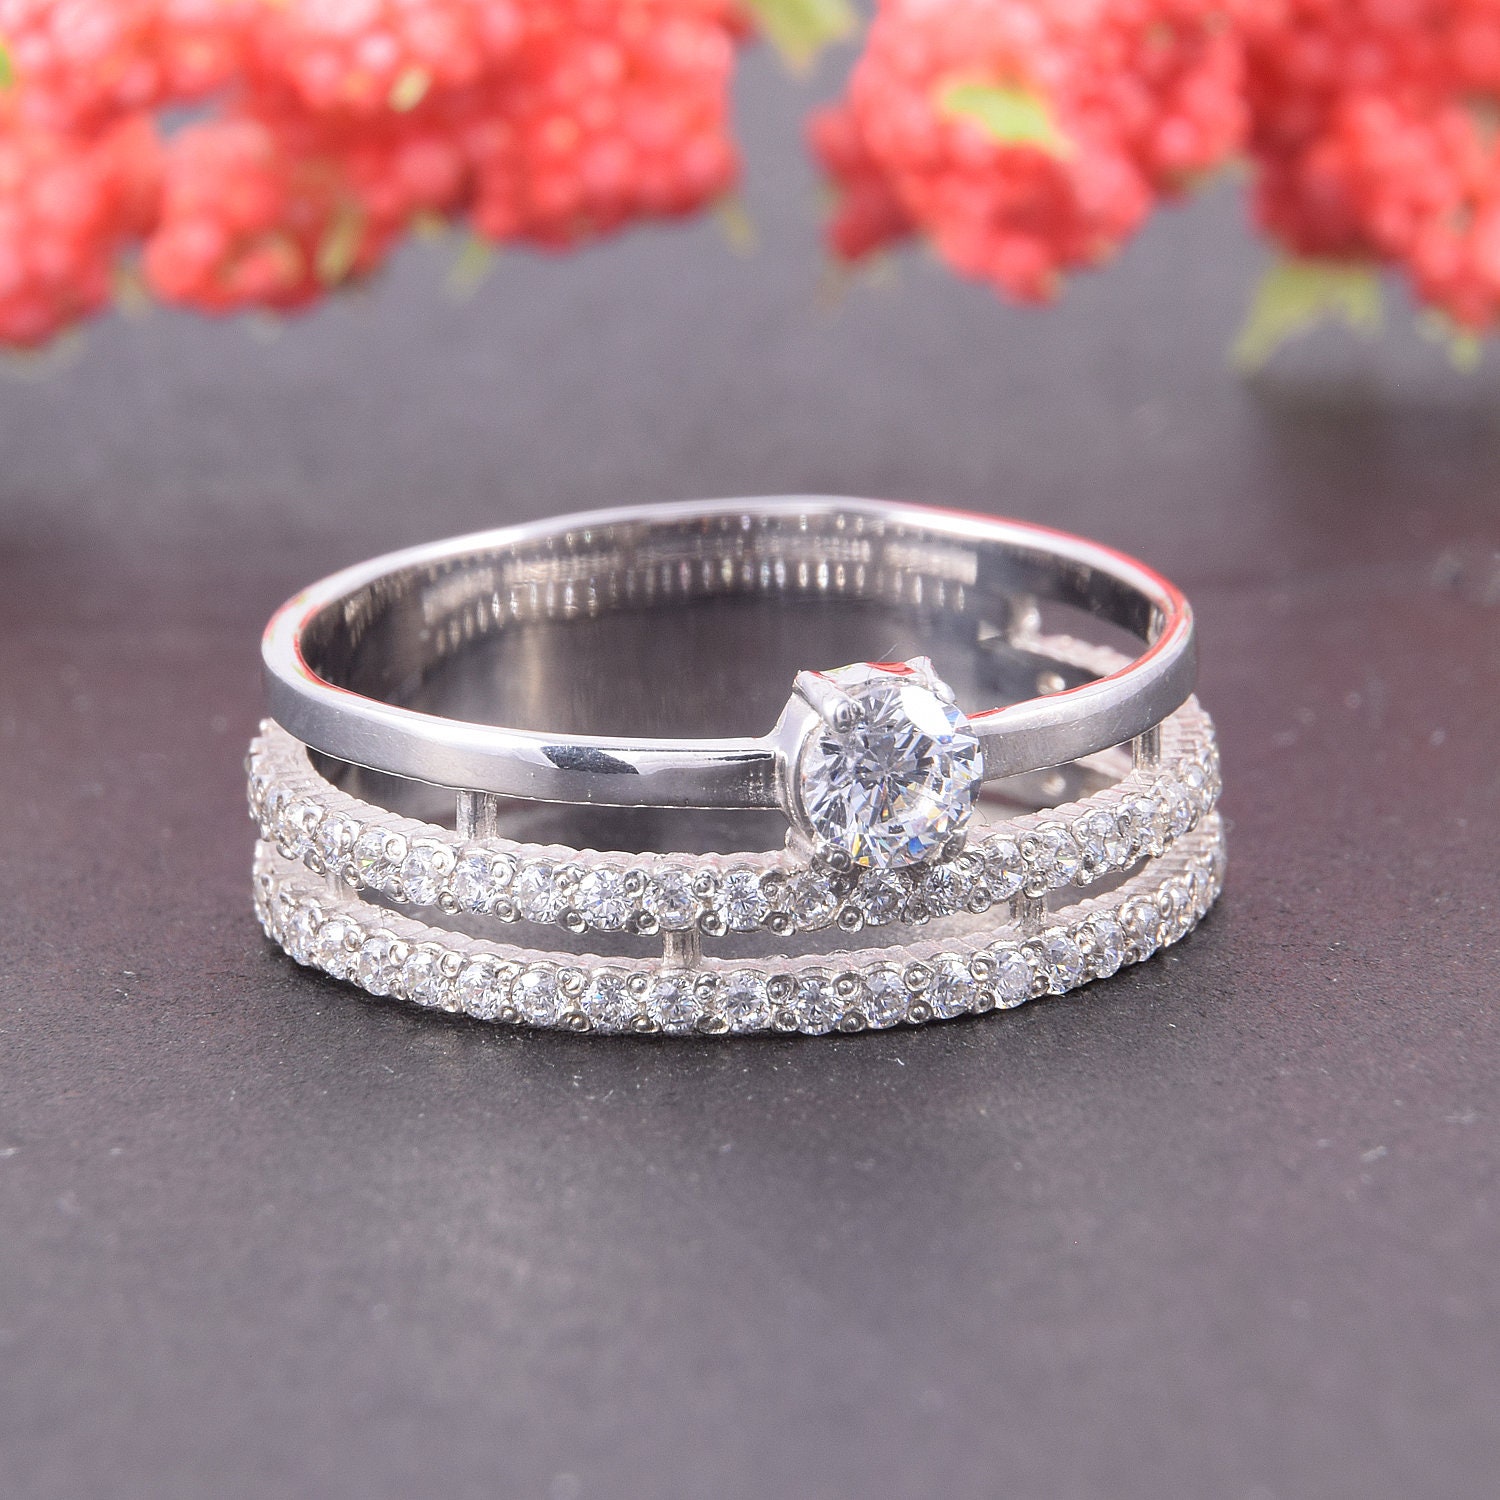 Unique 925 Sterling Silver Wide White Cz Wedding Band Dainty - Etsy